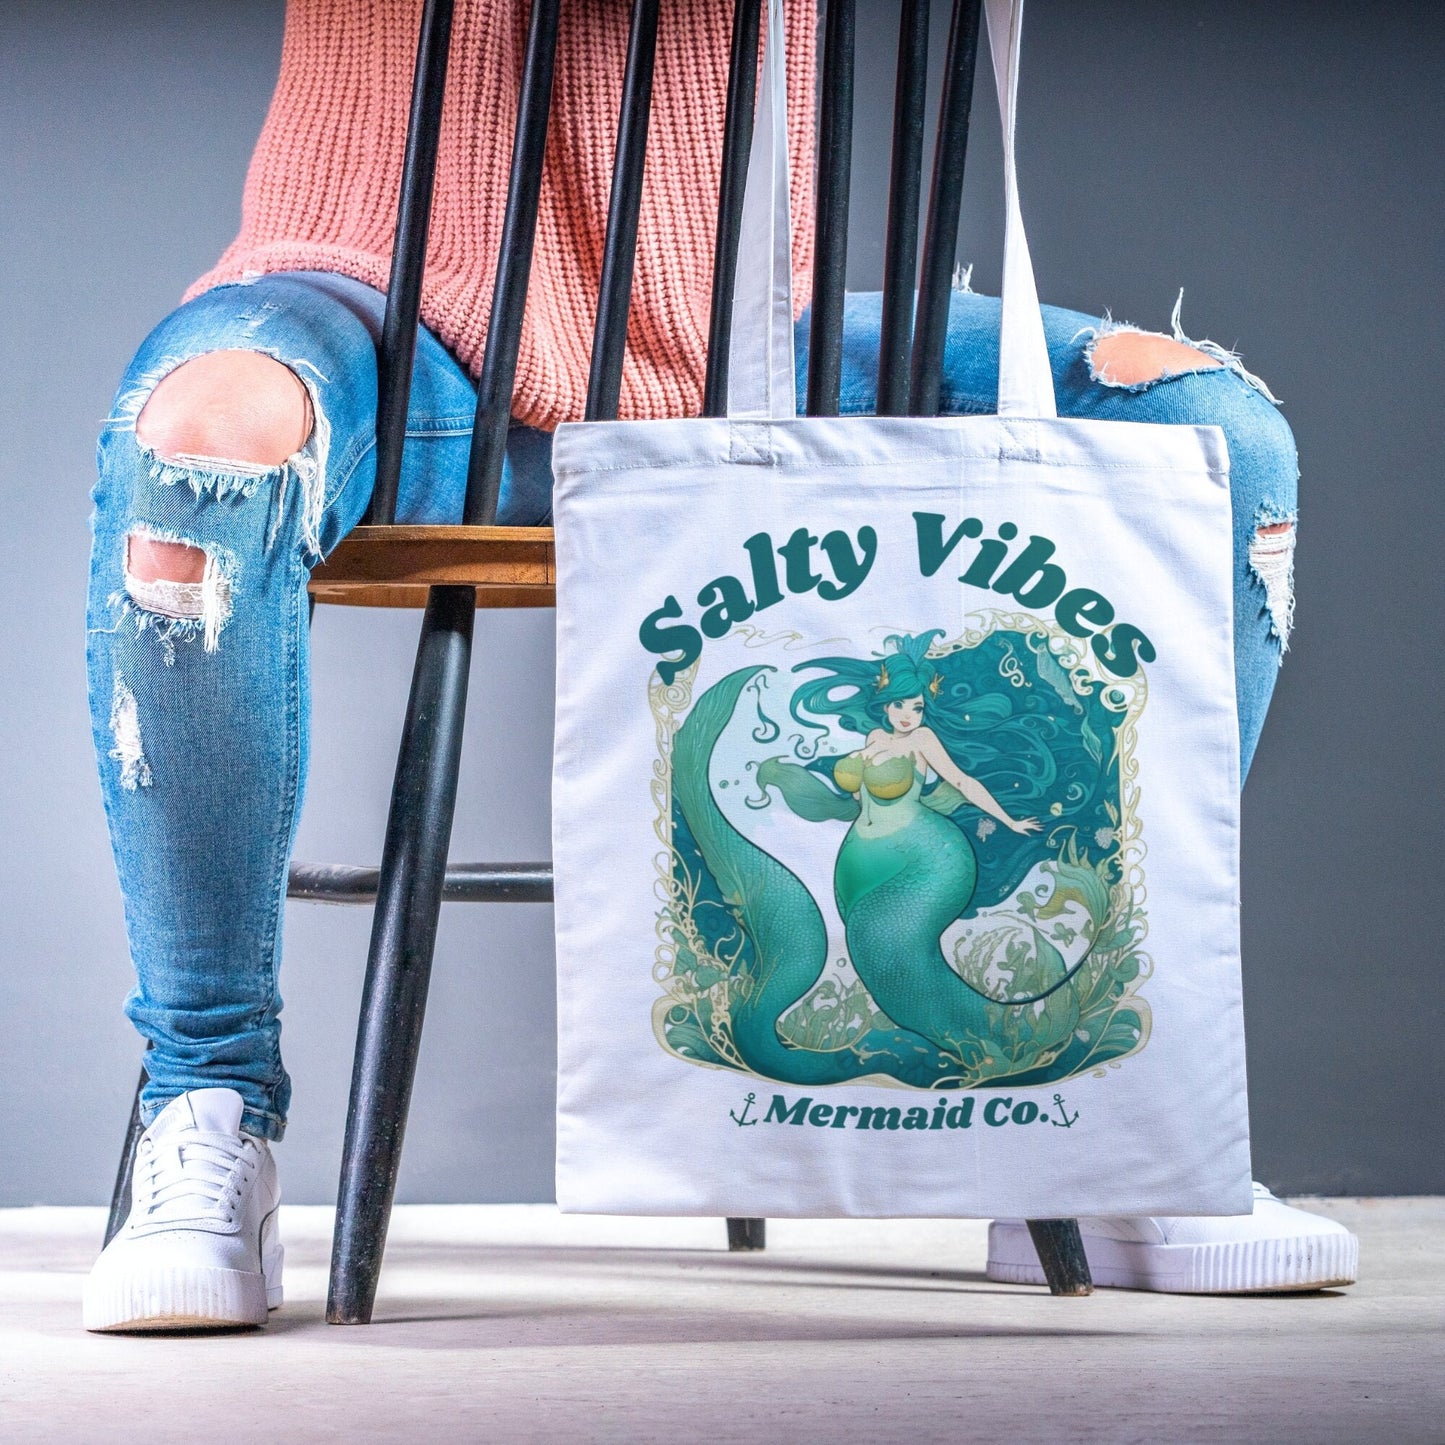 Mermaid Book Bag Swag Gift Reusable Canvas Tote Beach Bridal Bachelorette Party Travel Tote Stay Salty Vibes Blue Mermaid Little Bag Set 3